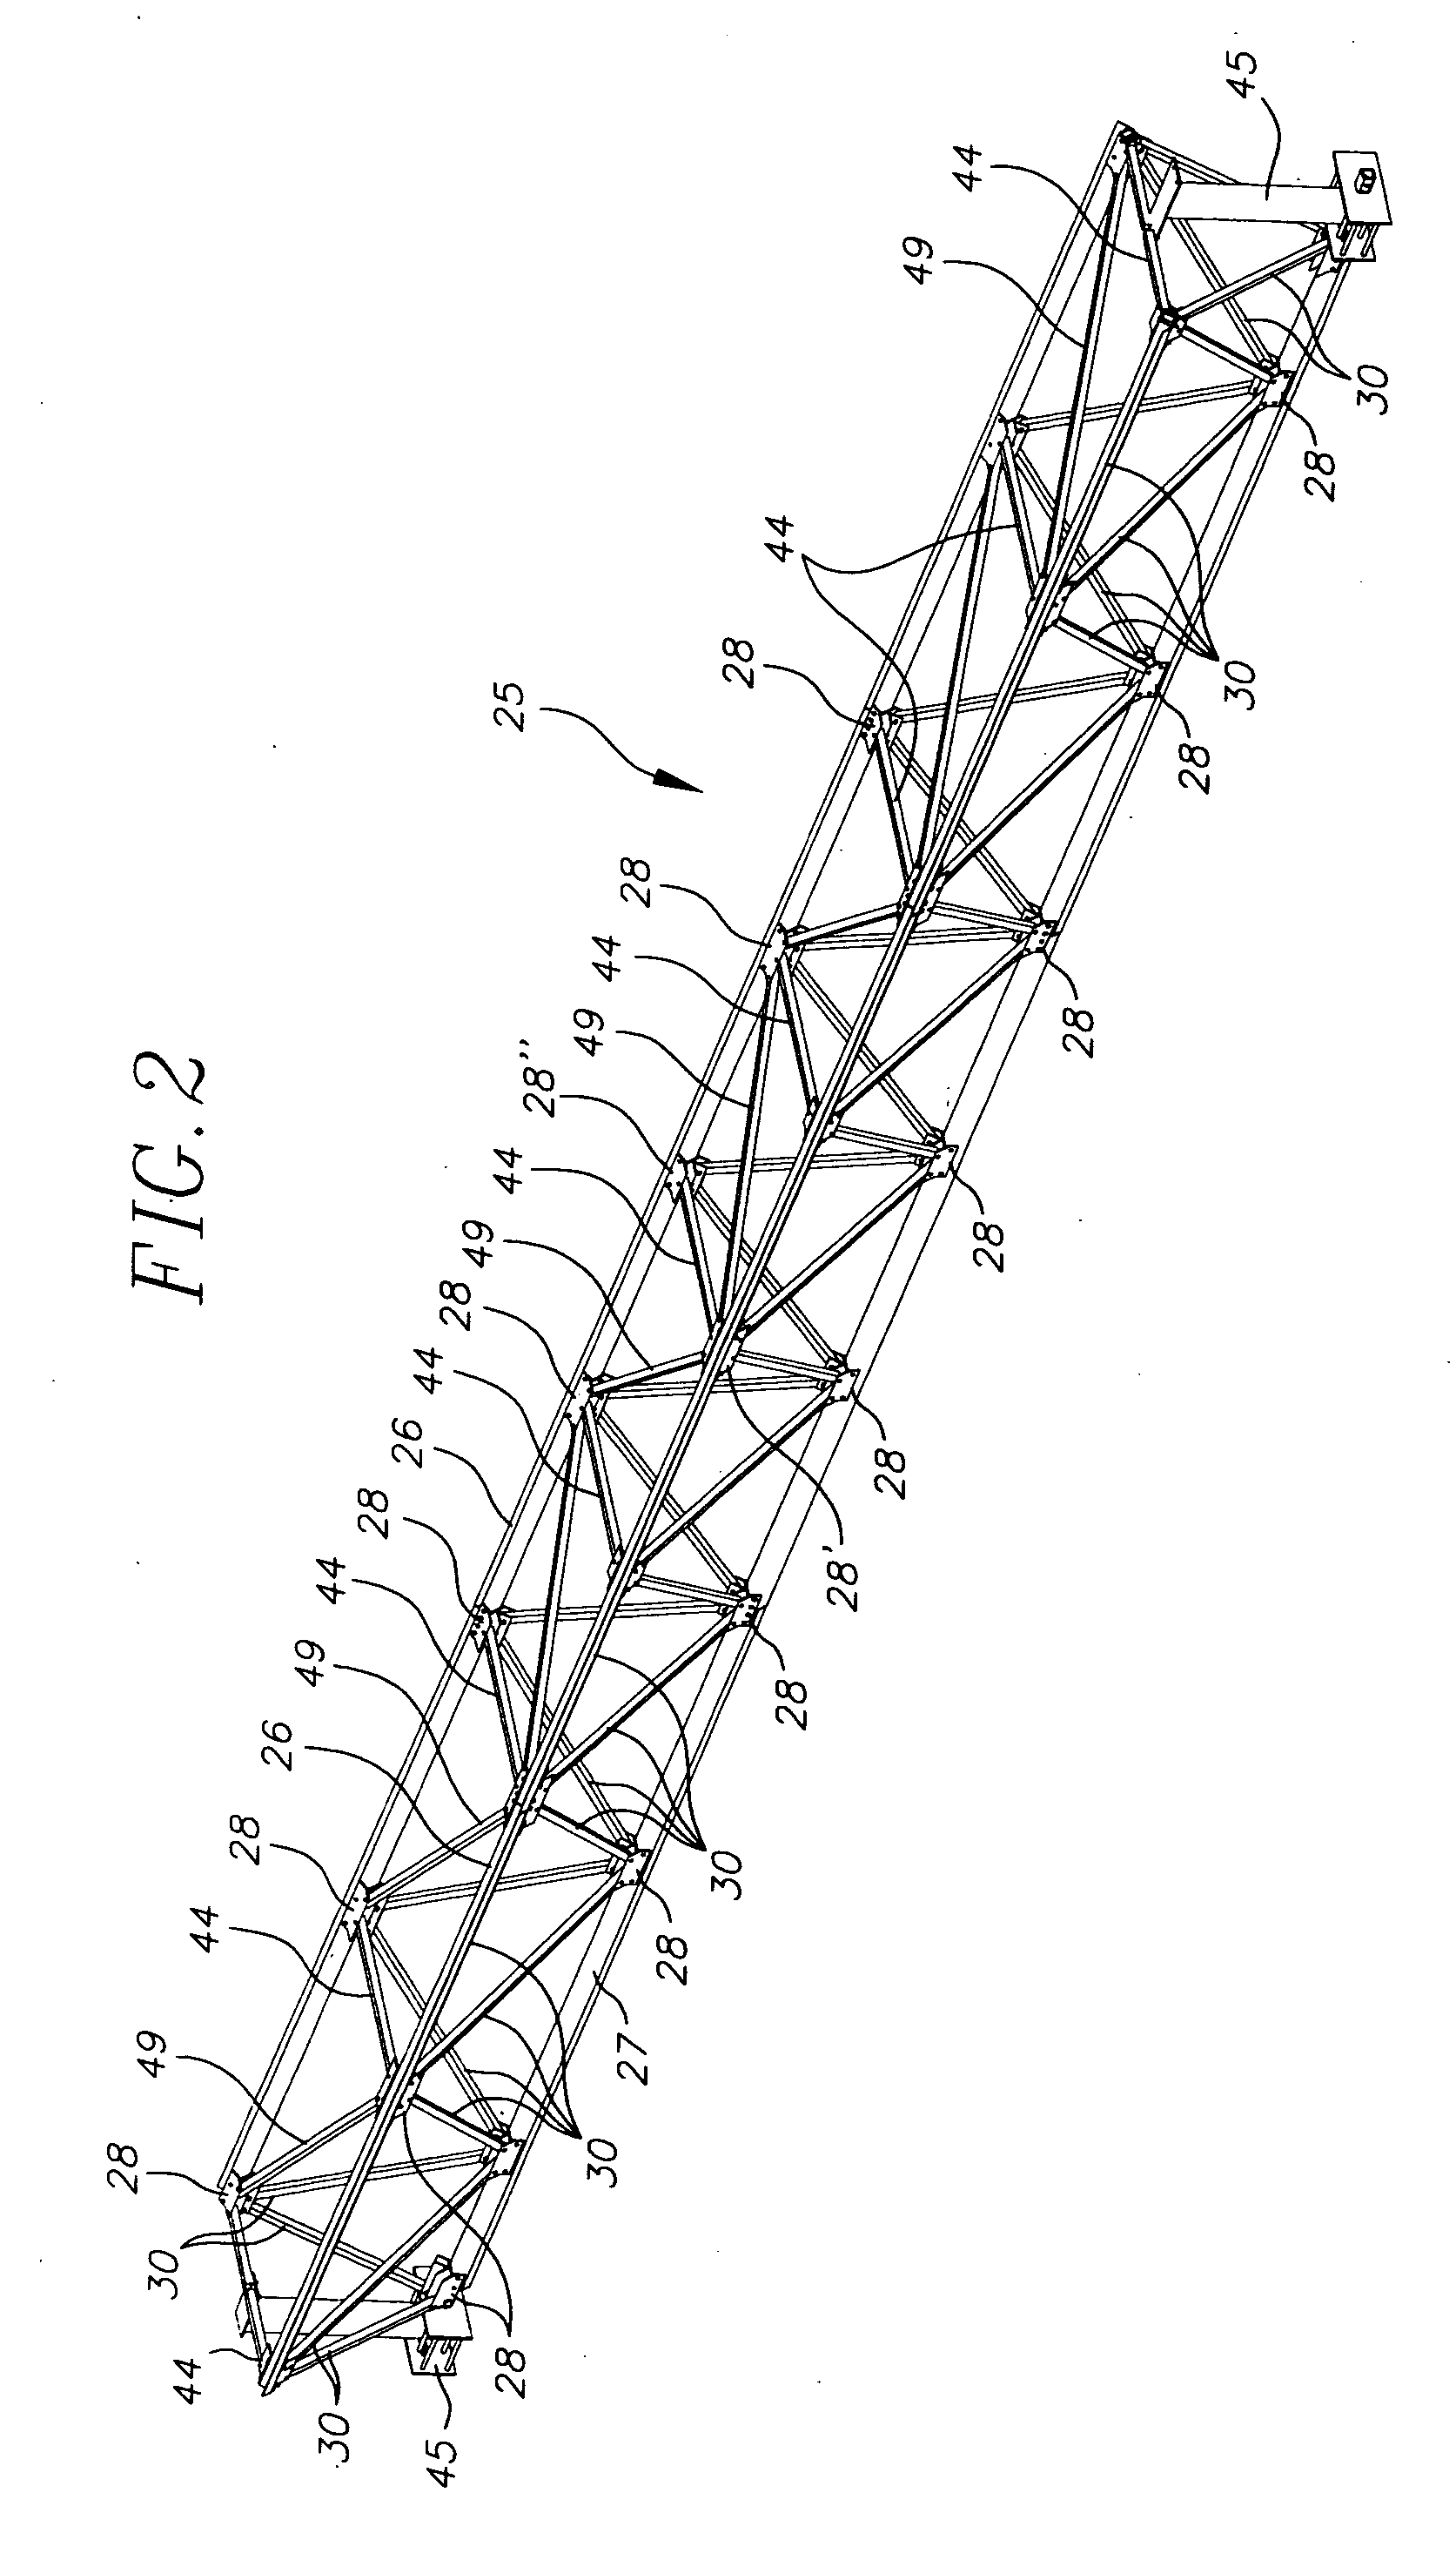 Space frames and connection node arrangement for them